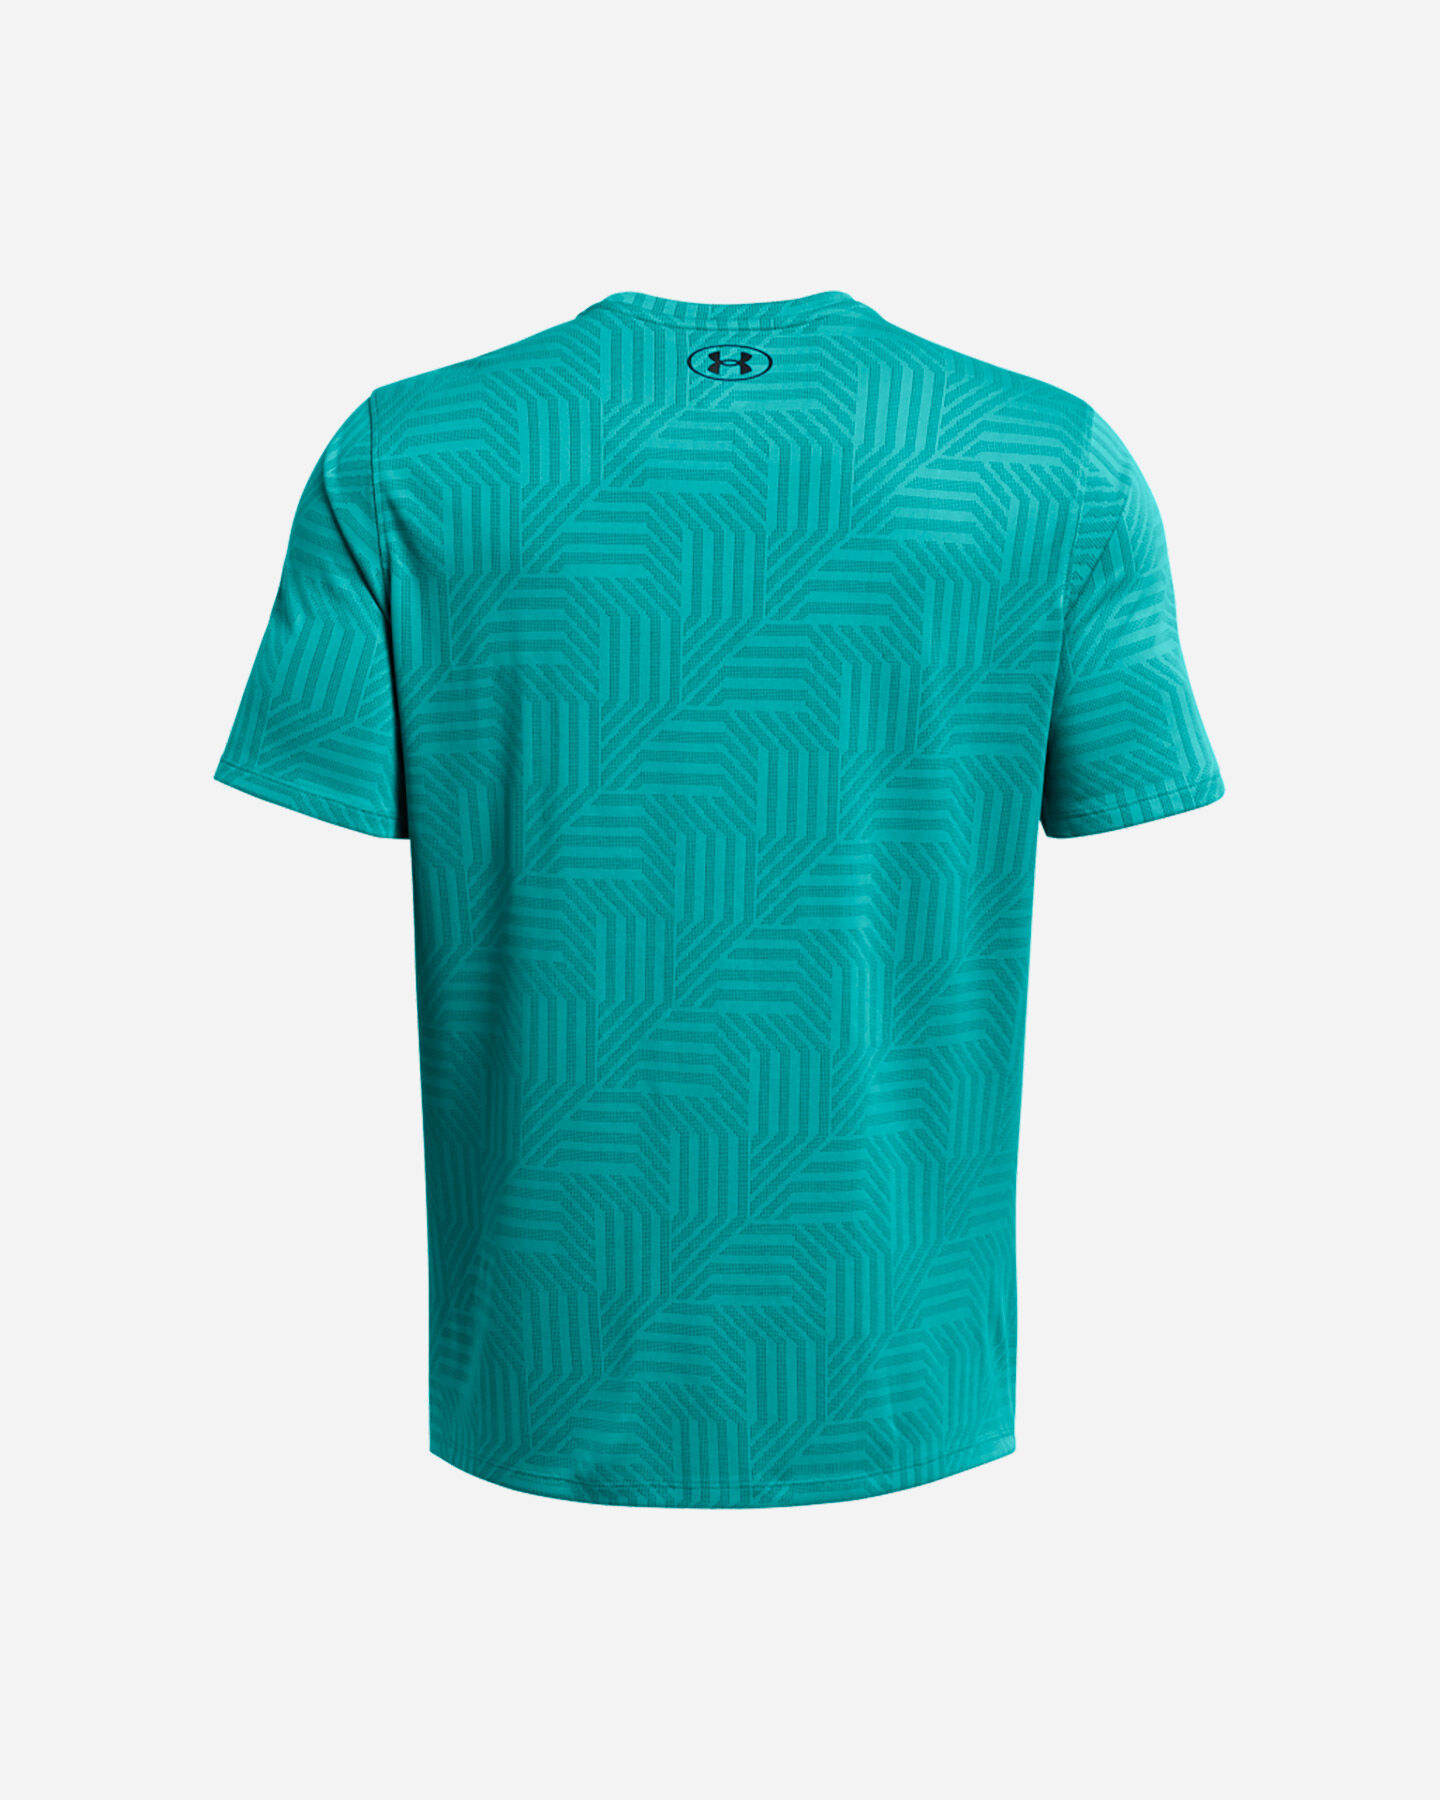  T-Shirt training UNDER ARMOUR TECH VENT GEOTESSA M S5641378|0449|XS scatto 1